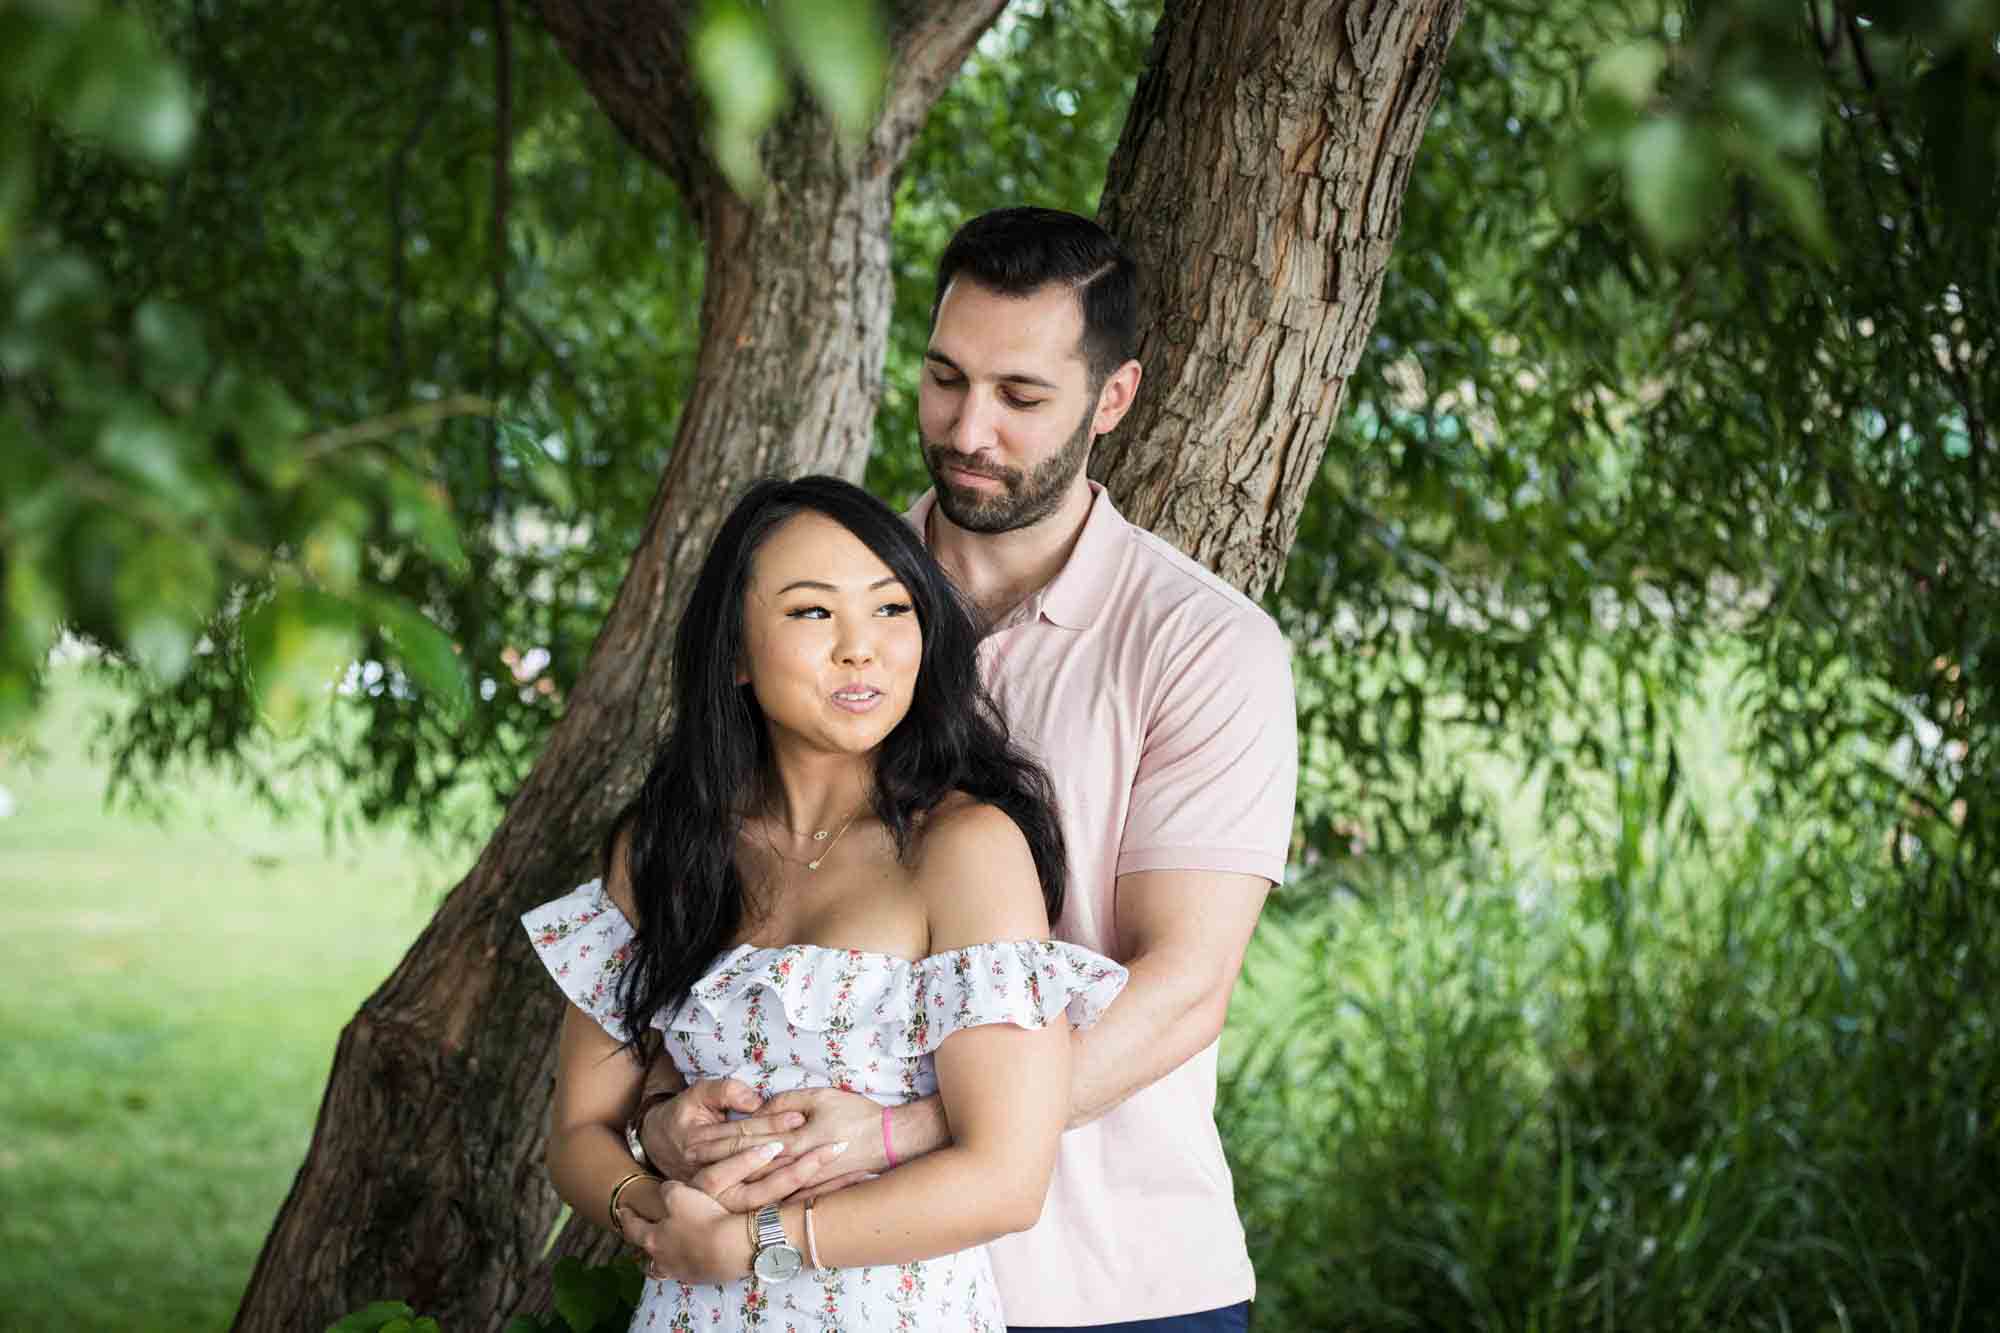 Couple hugging under tree during Gantry Plaza State Park engagement session for an article on engagement portrait clothing tips